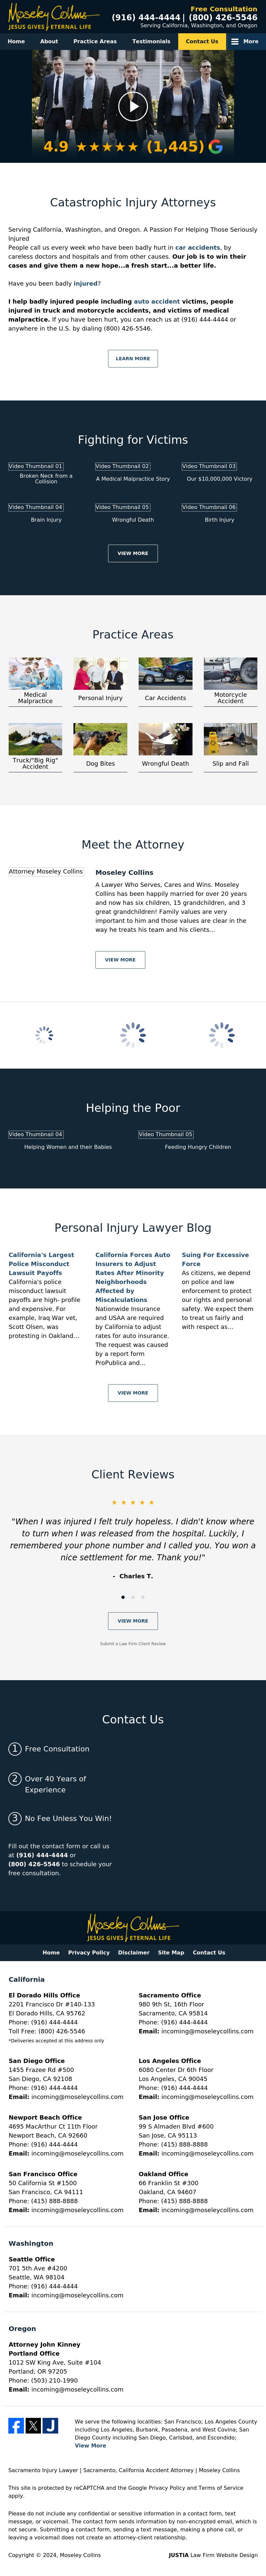 Moseley Collins - Los Angeles CA Lawyers